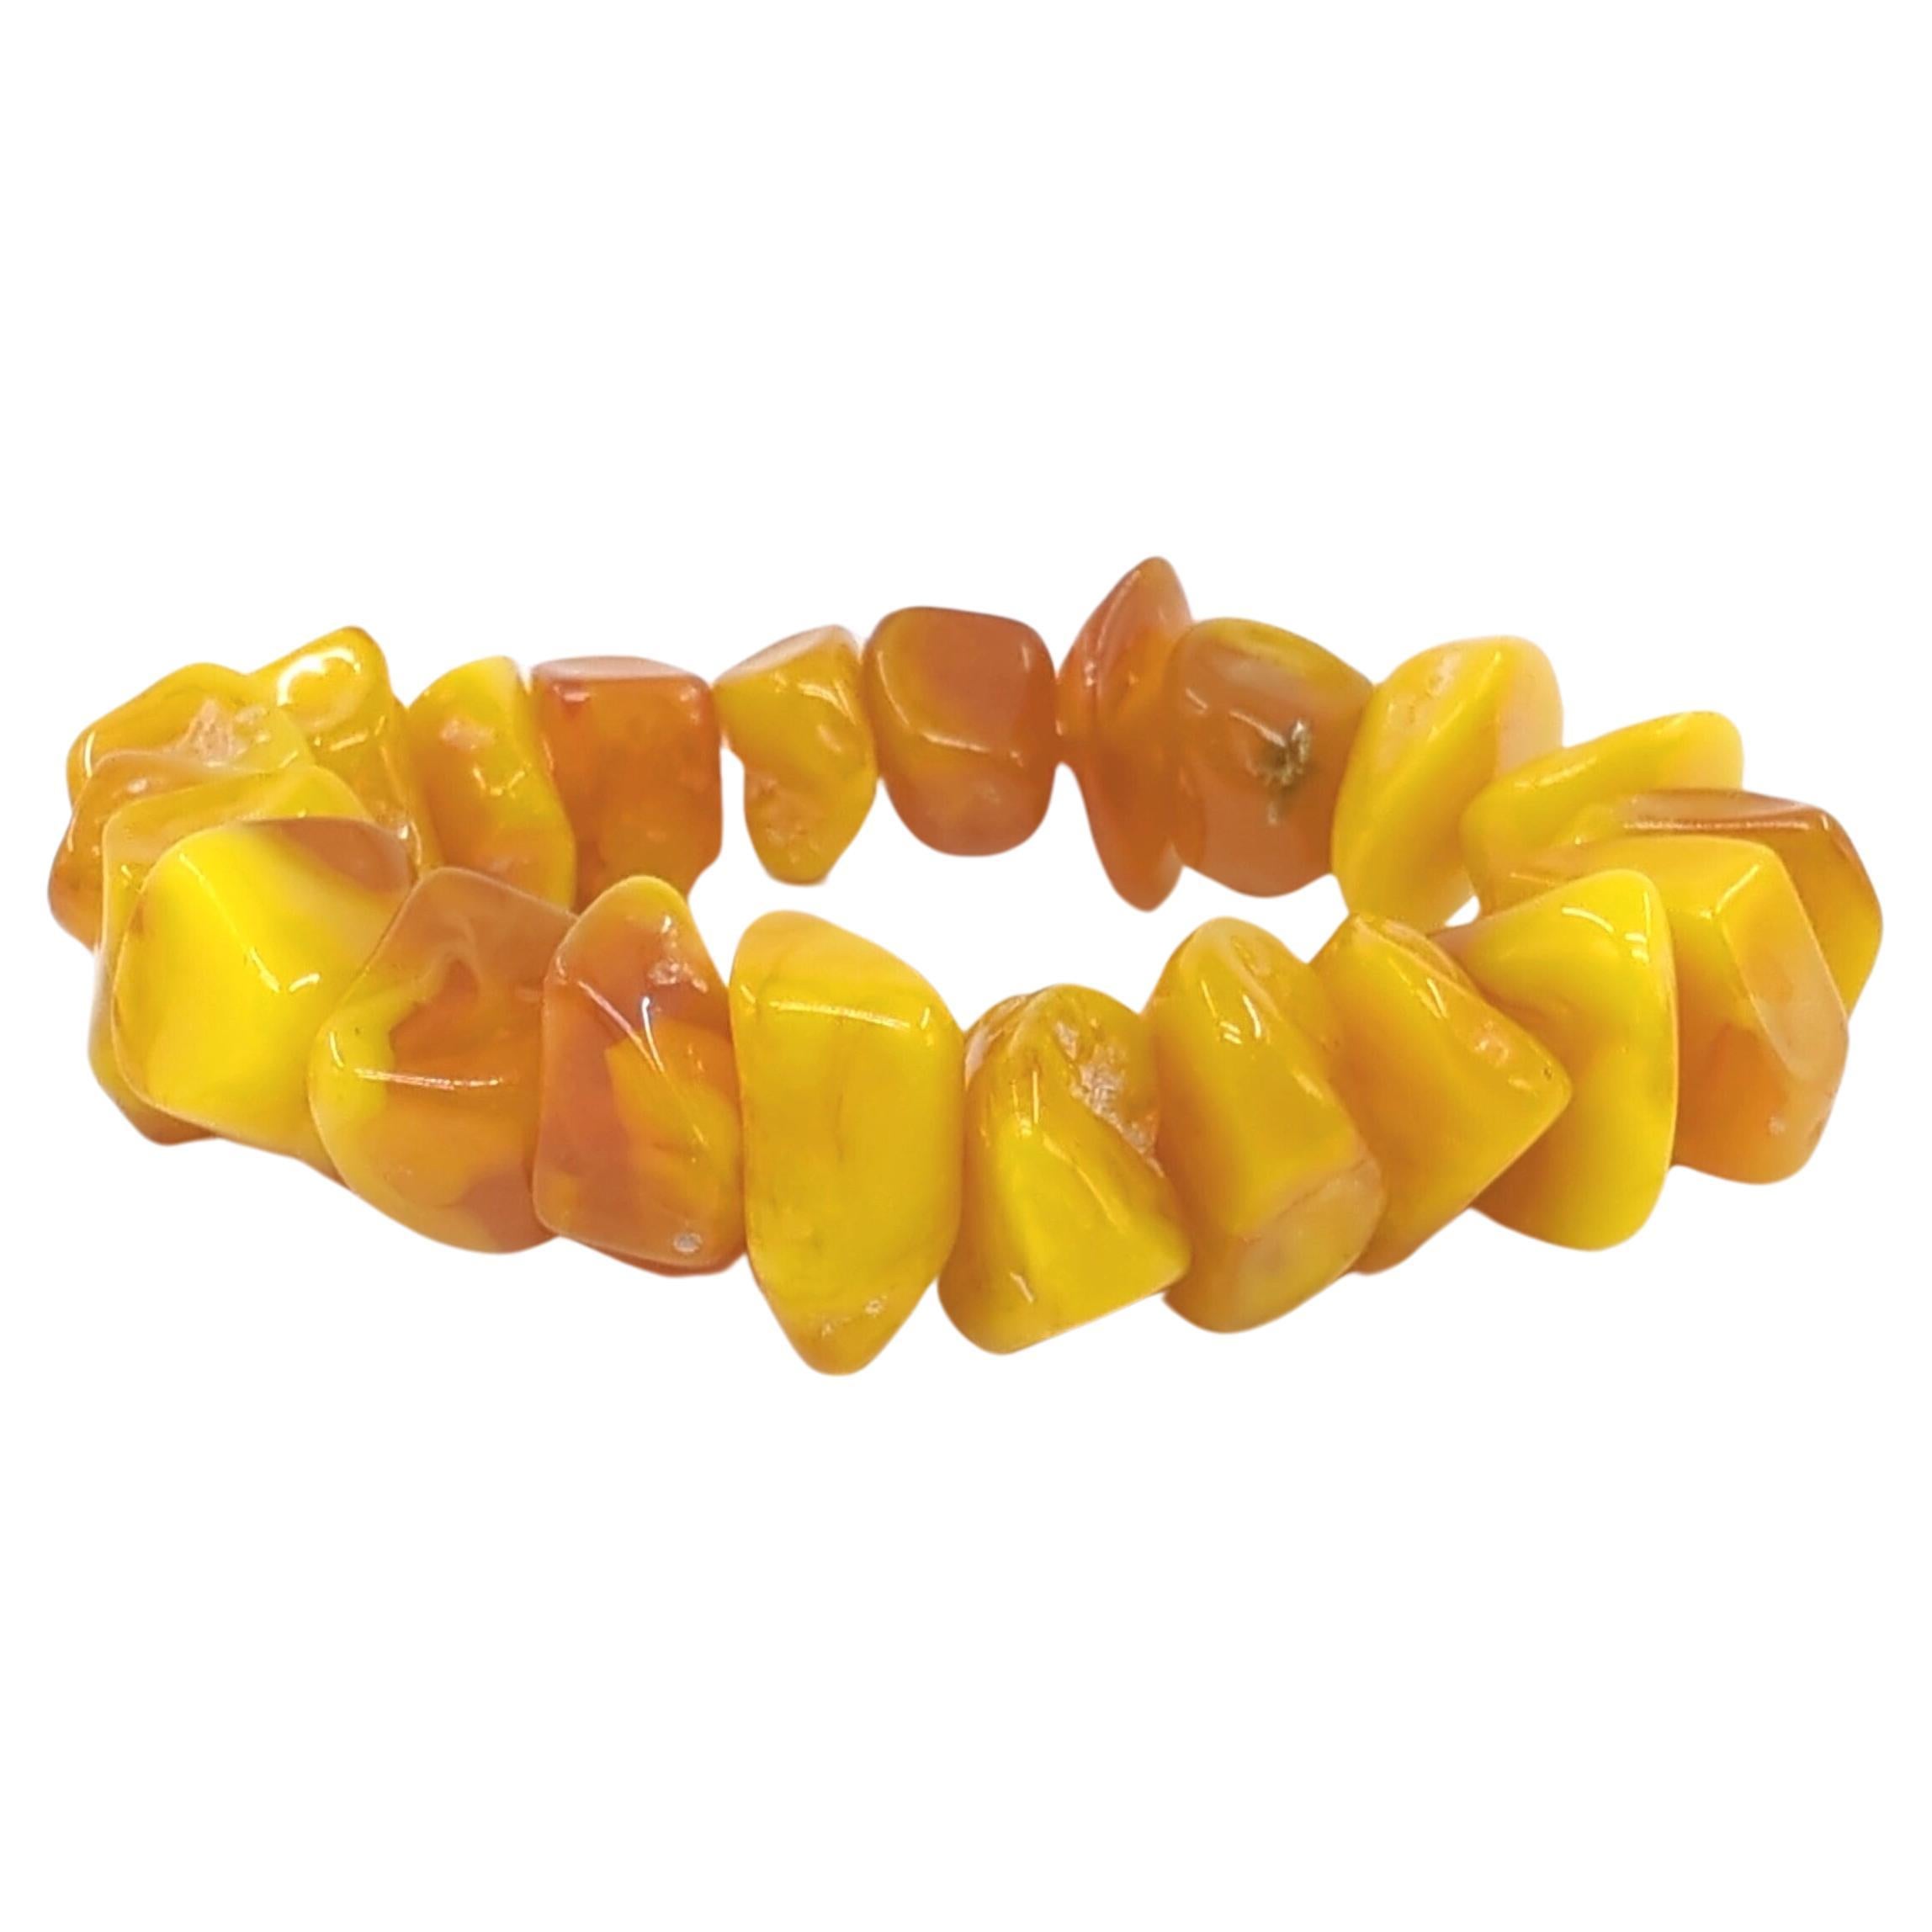 This Chinese beeswax bracelet is a stunning example of natural beauty and craftsmanship. Comprised of 22 individual pieces of natural form beeswax, each piece is carefully polished to reveal its inherent luster. The average dimensions of each